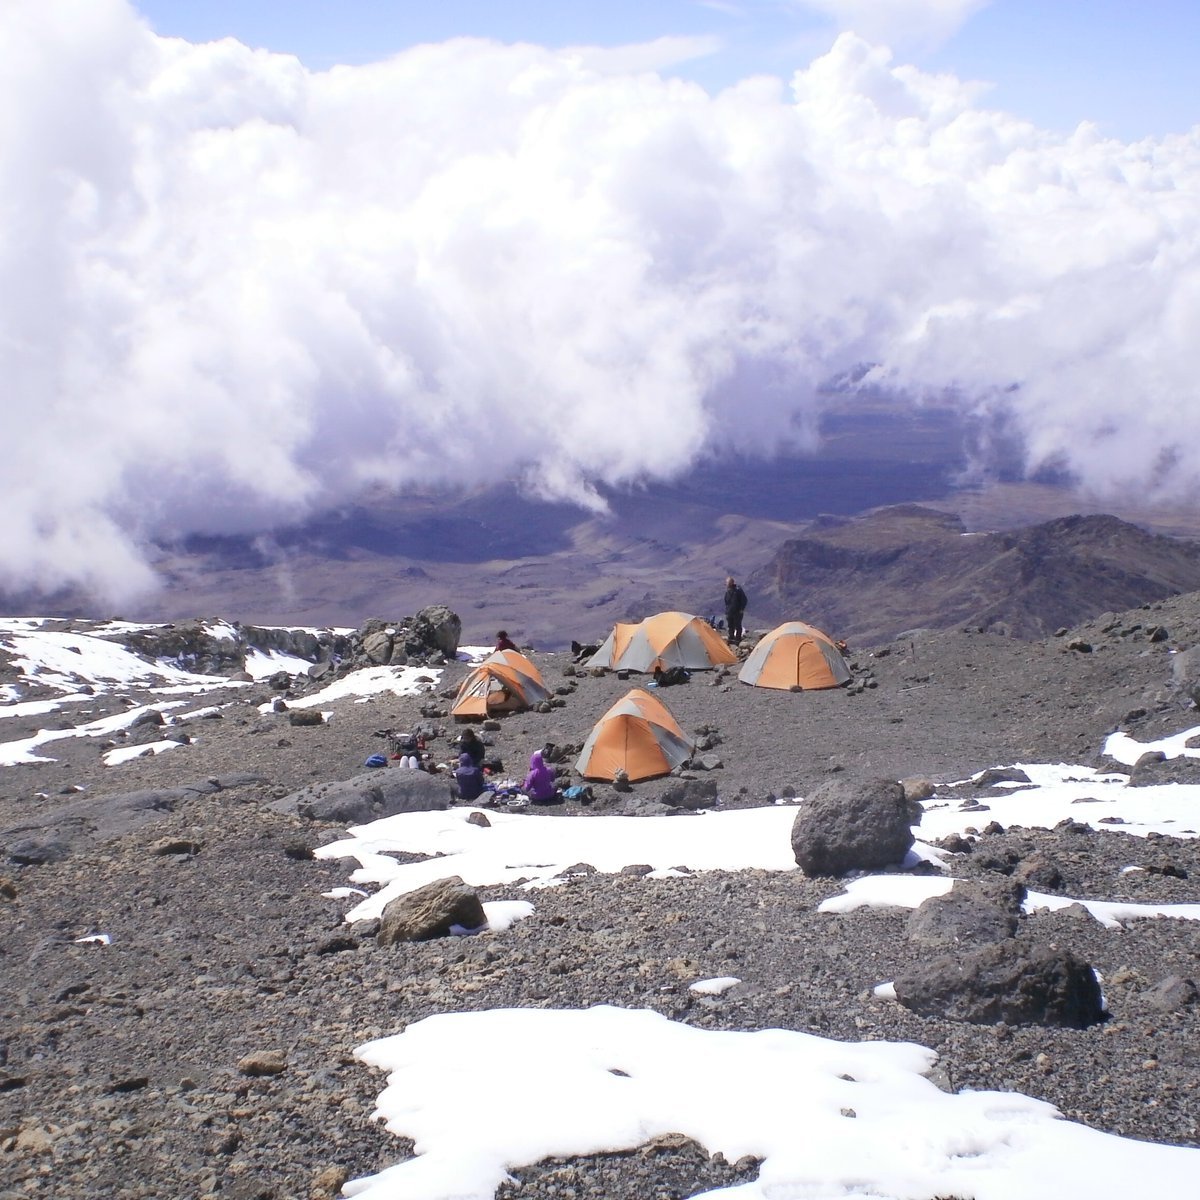 High camp in the mountains of Tanzania